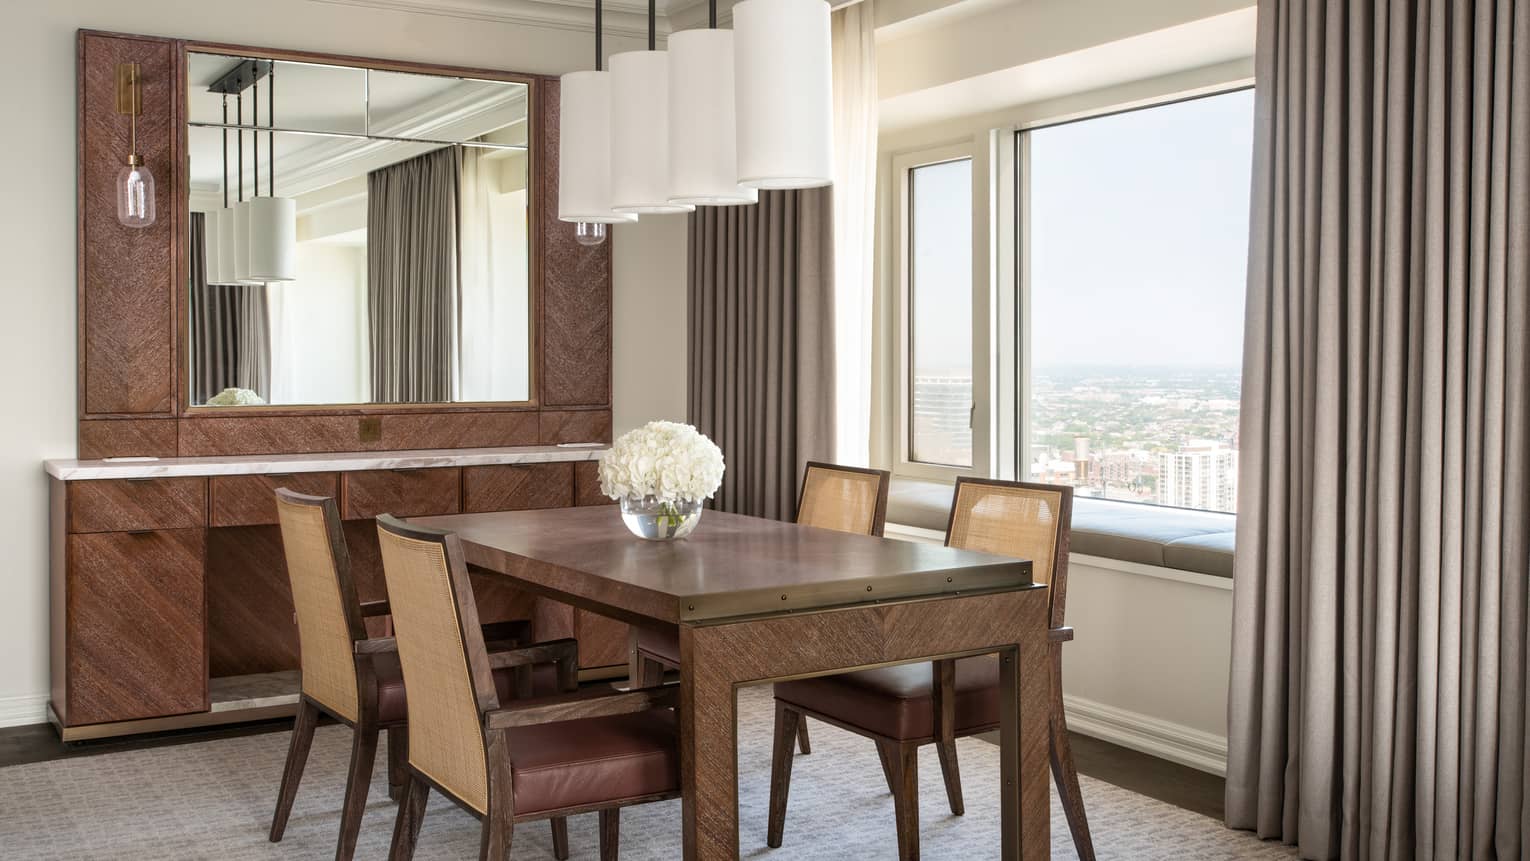 Wood dining table with four chairs, buffet with mirror, white cylindrical light fixture, window with city view